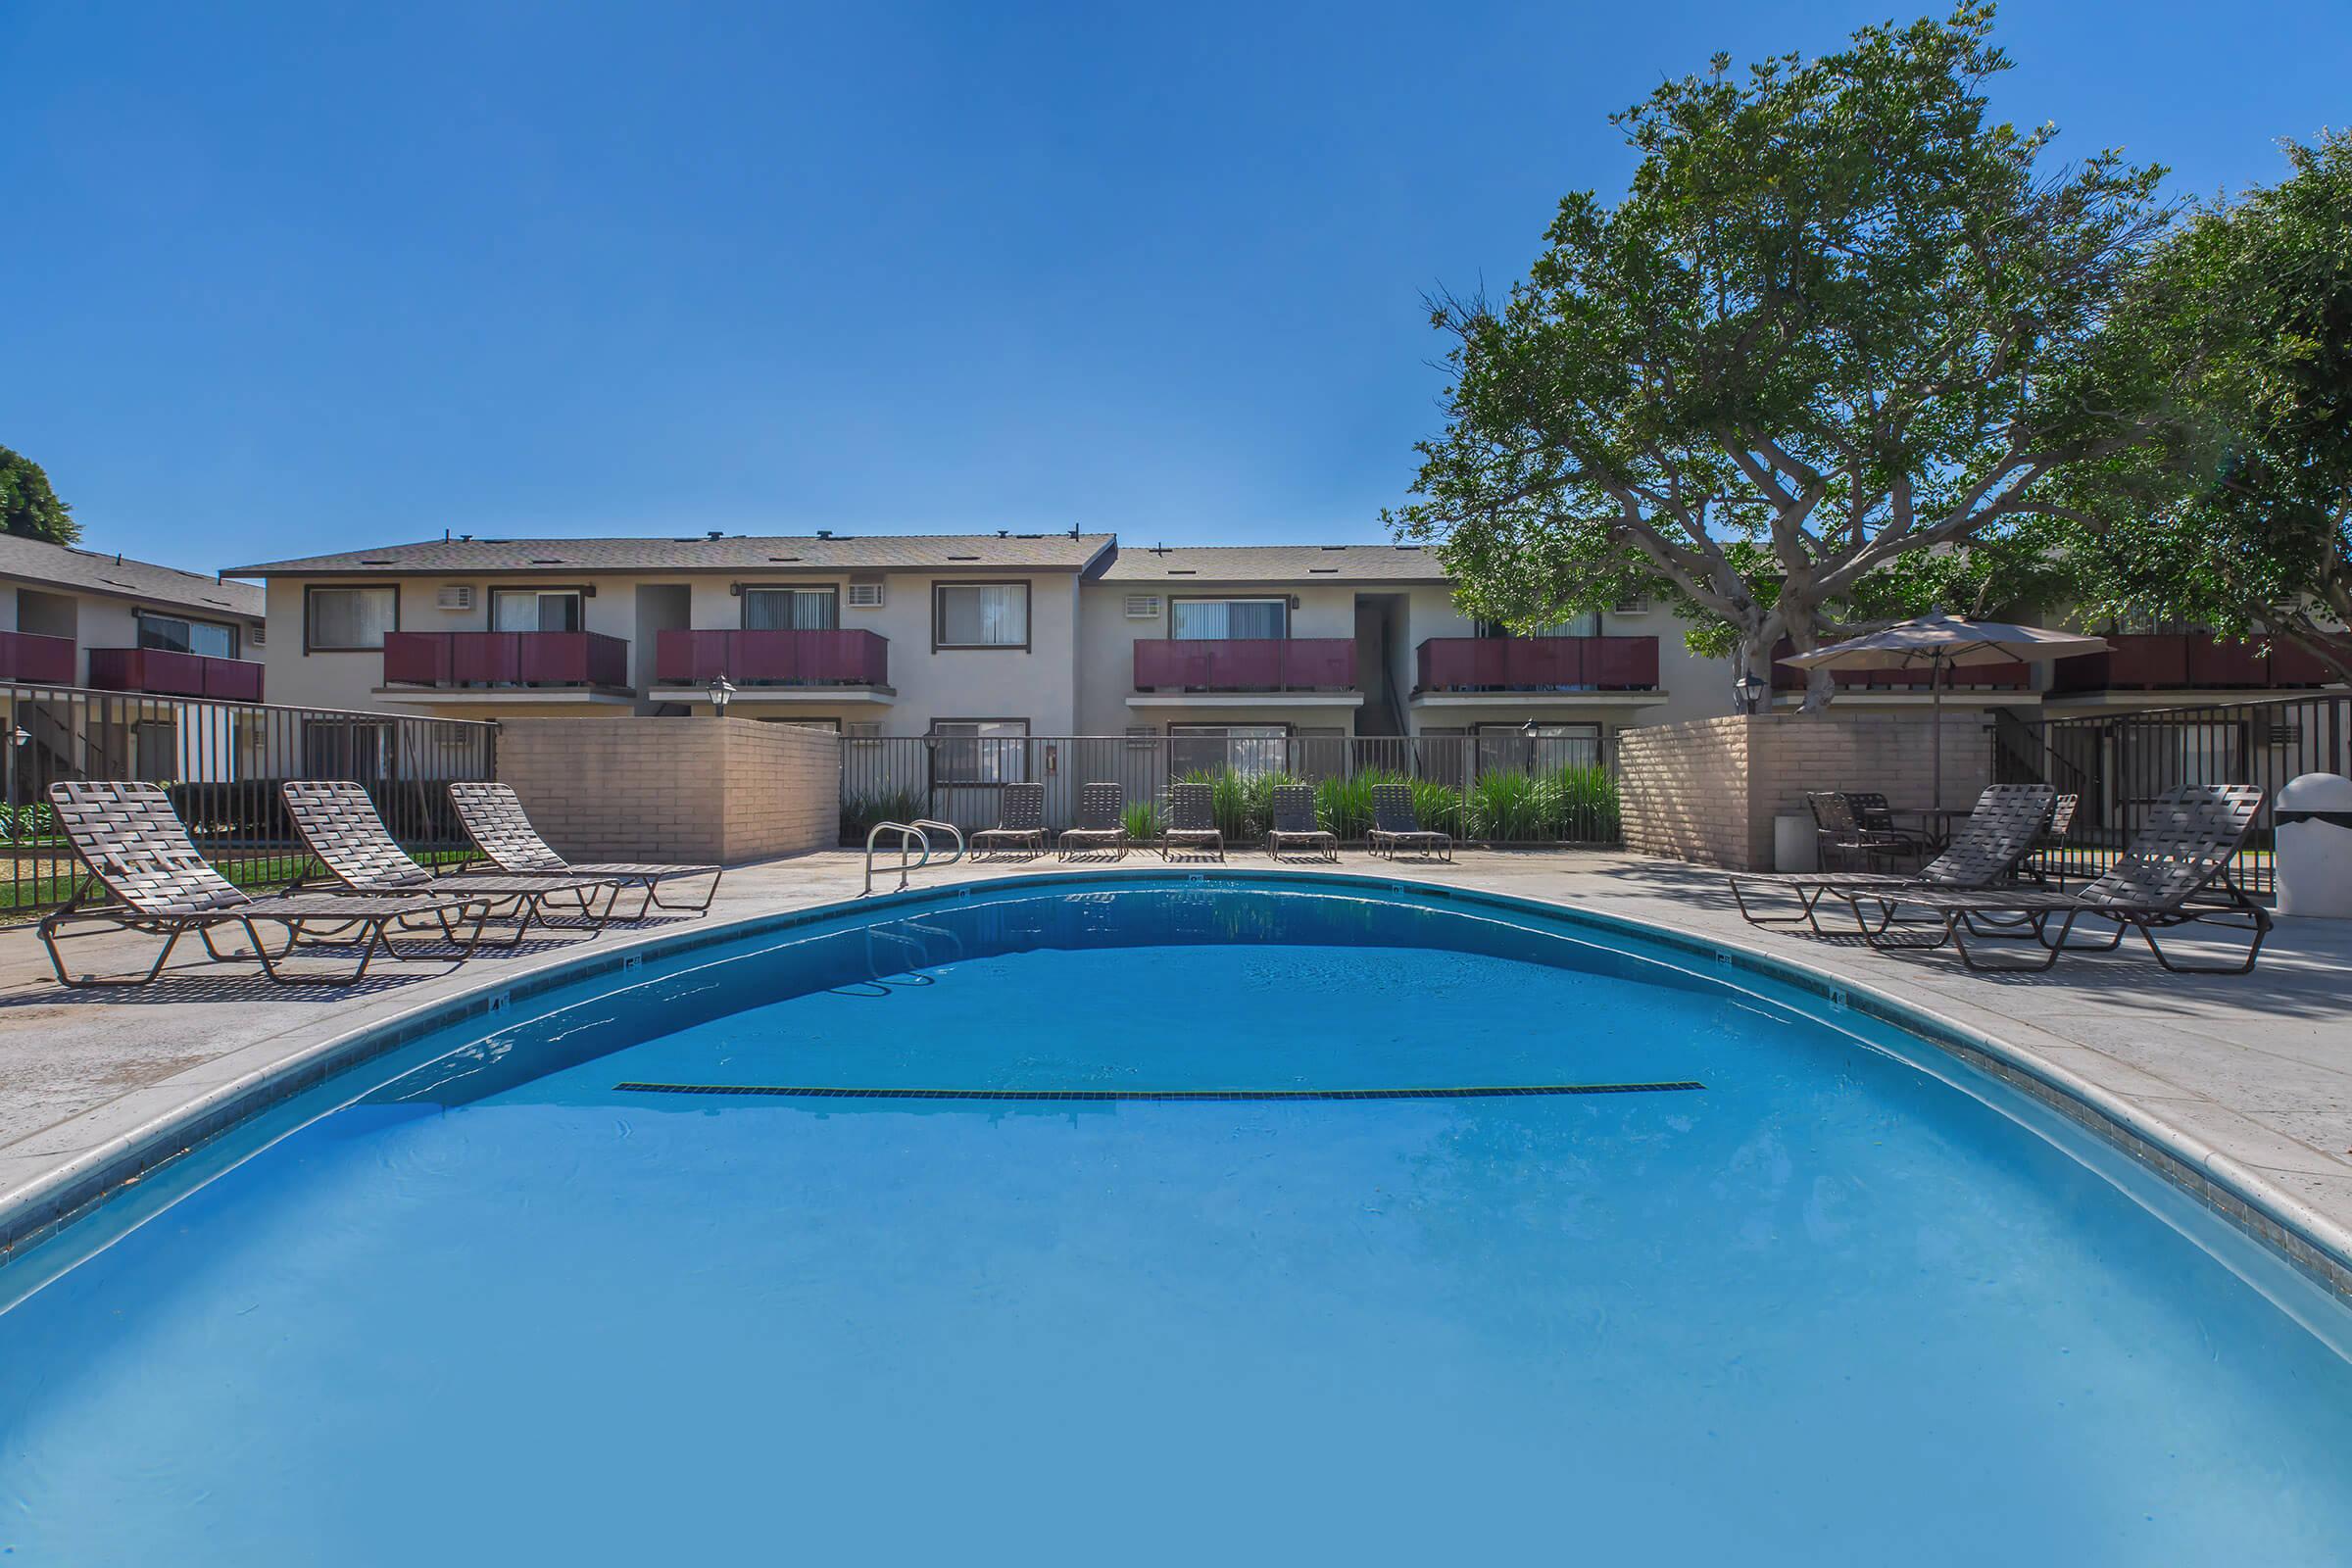 Del Amo Apartment Homes community pool surrounded with chairs